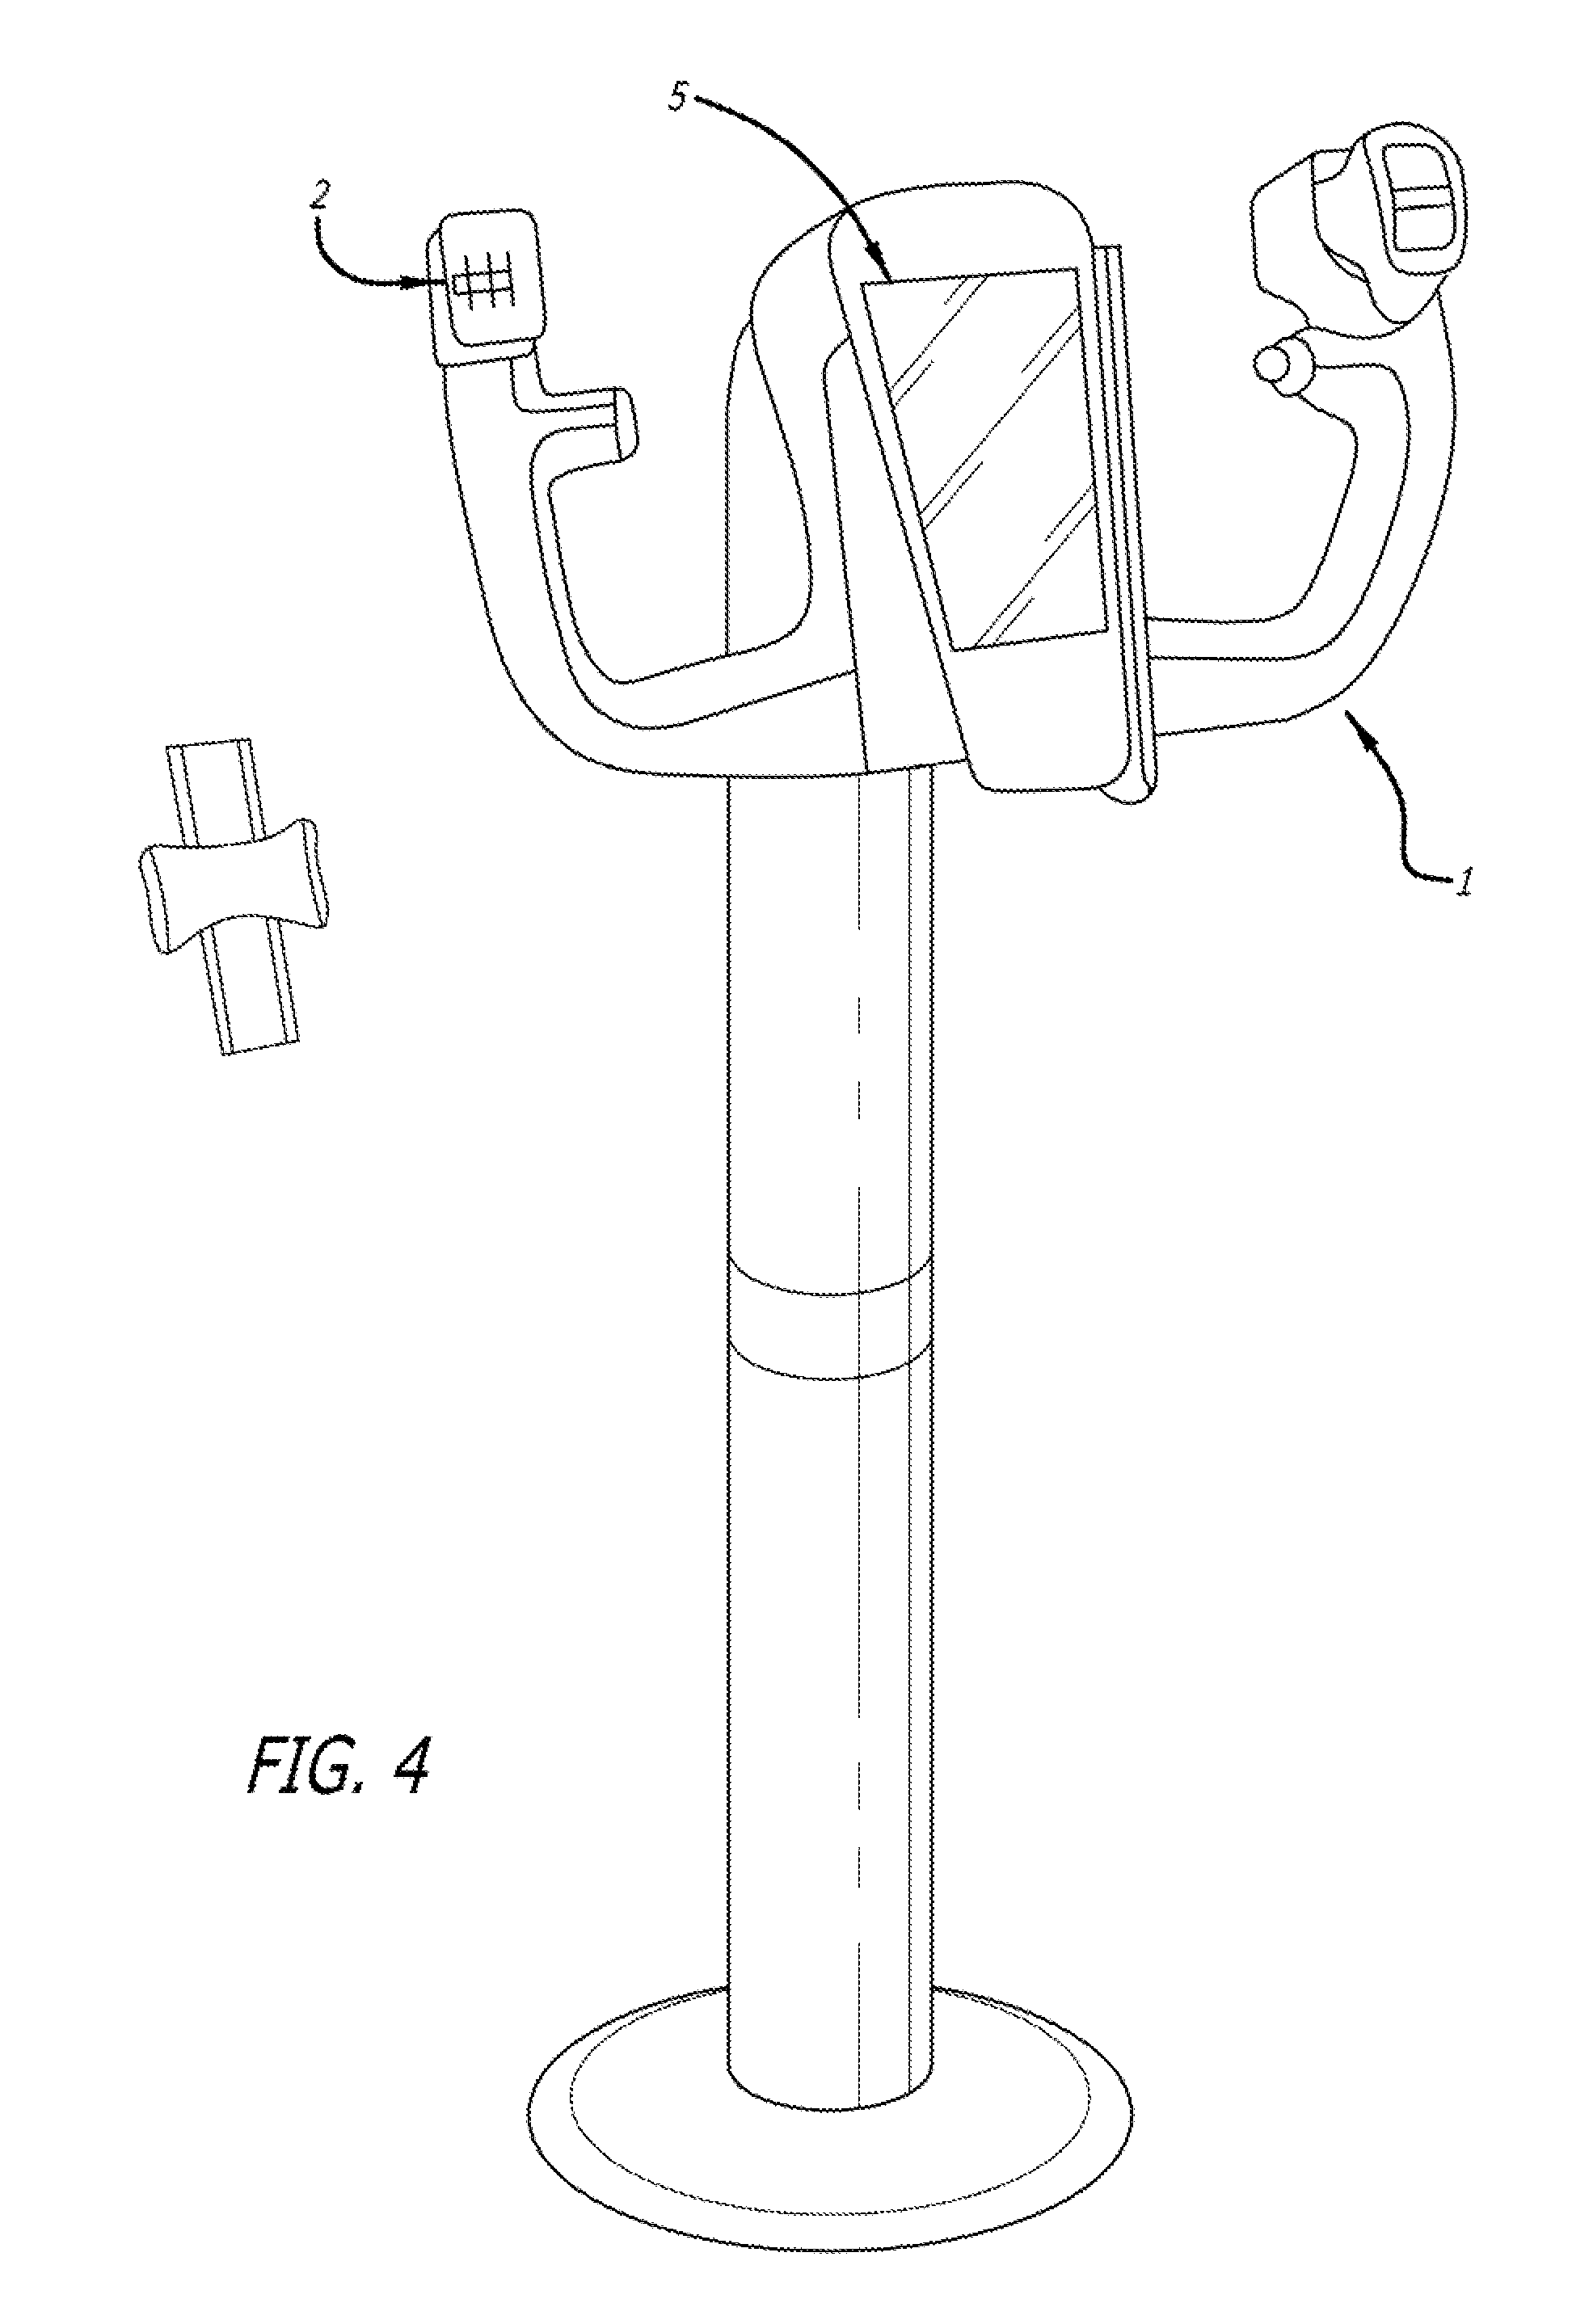 Simulation transmitter for remote operated vehicles